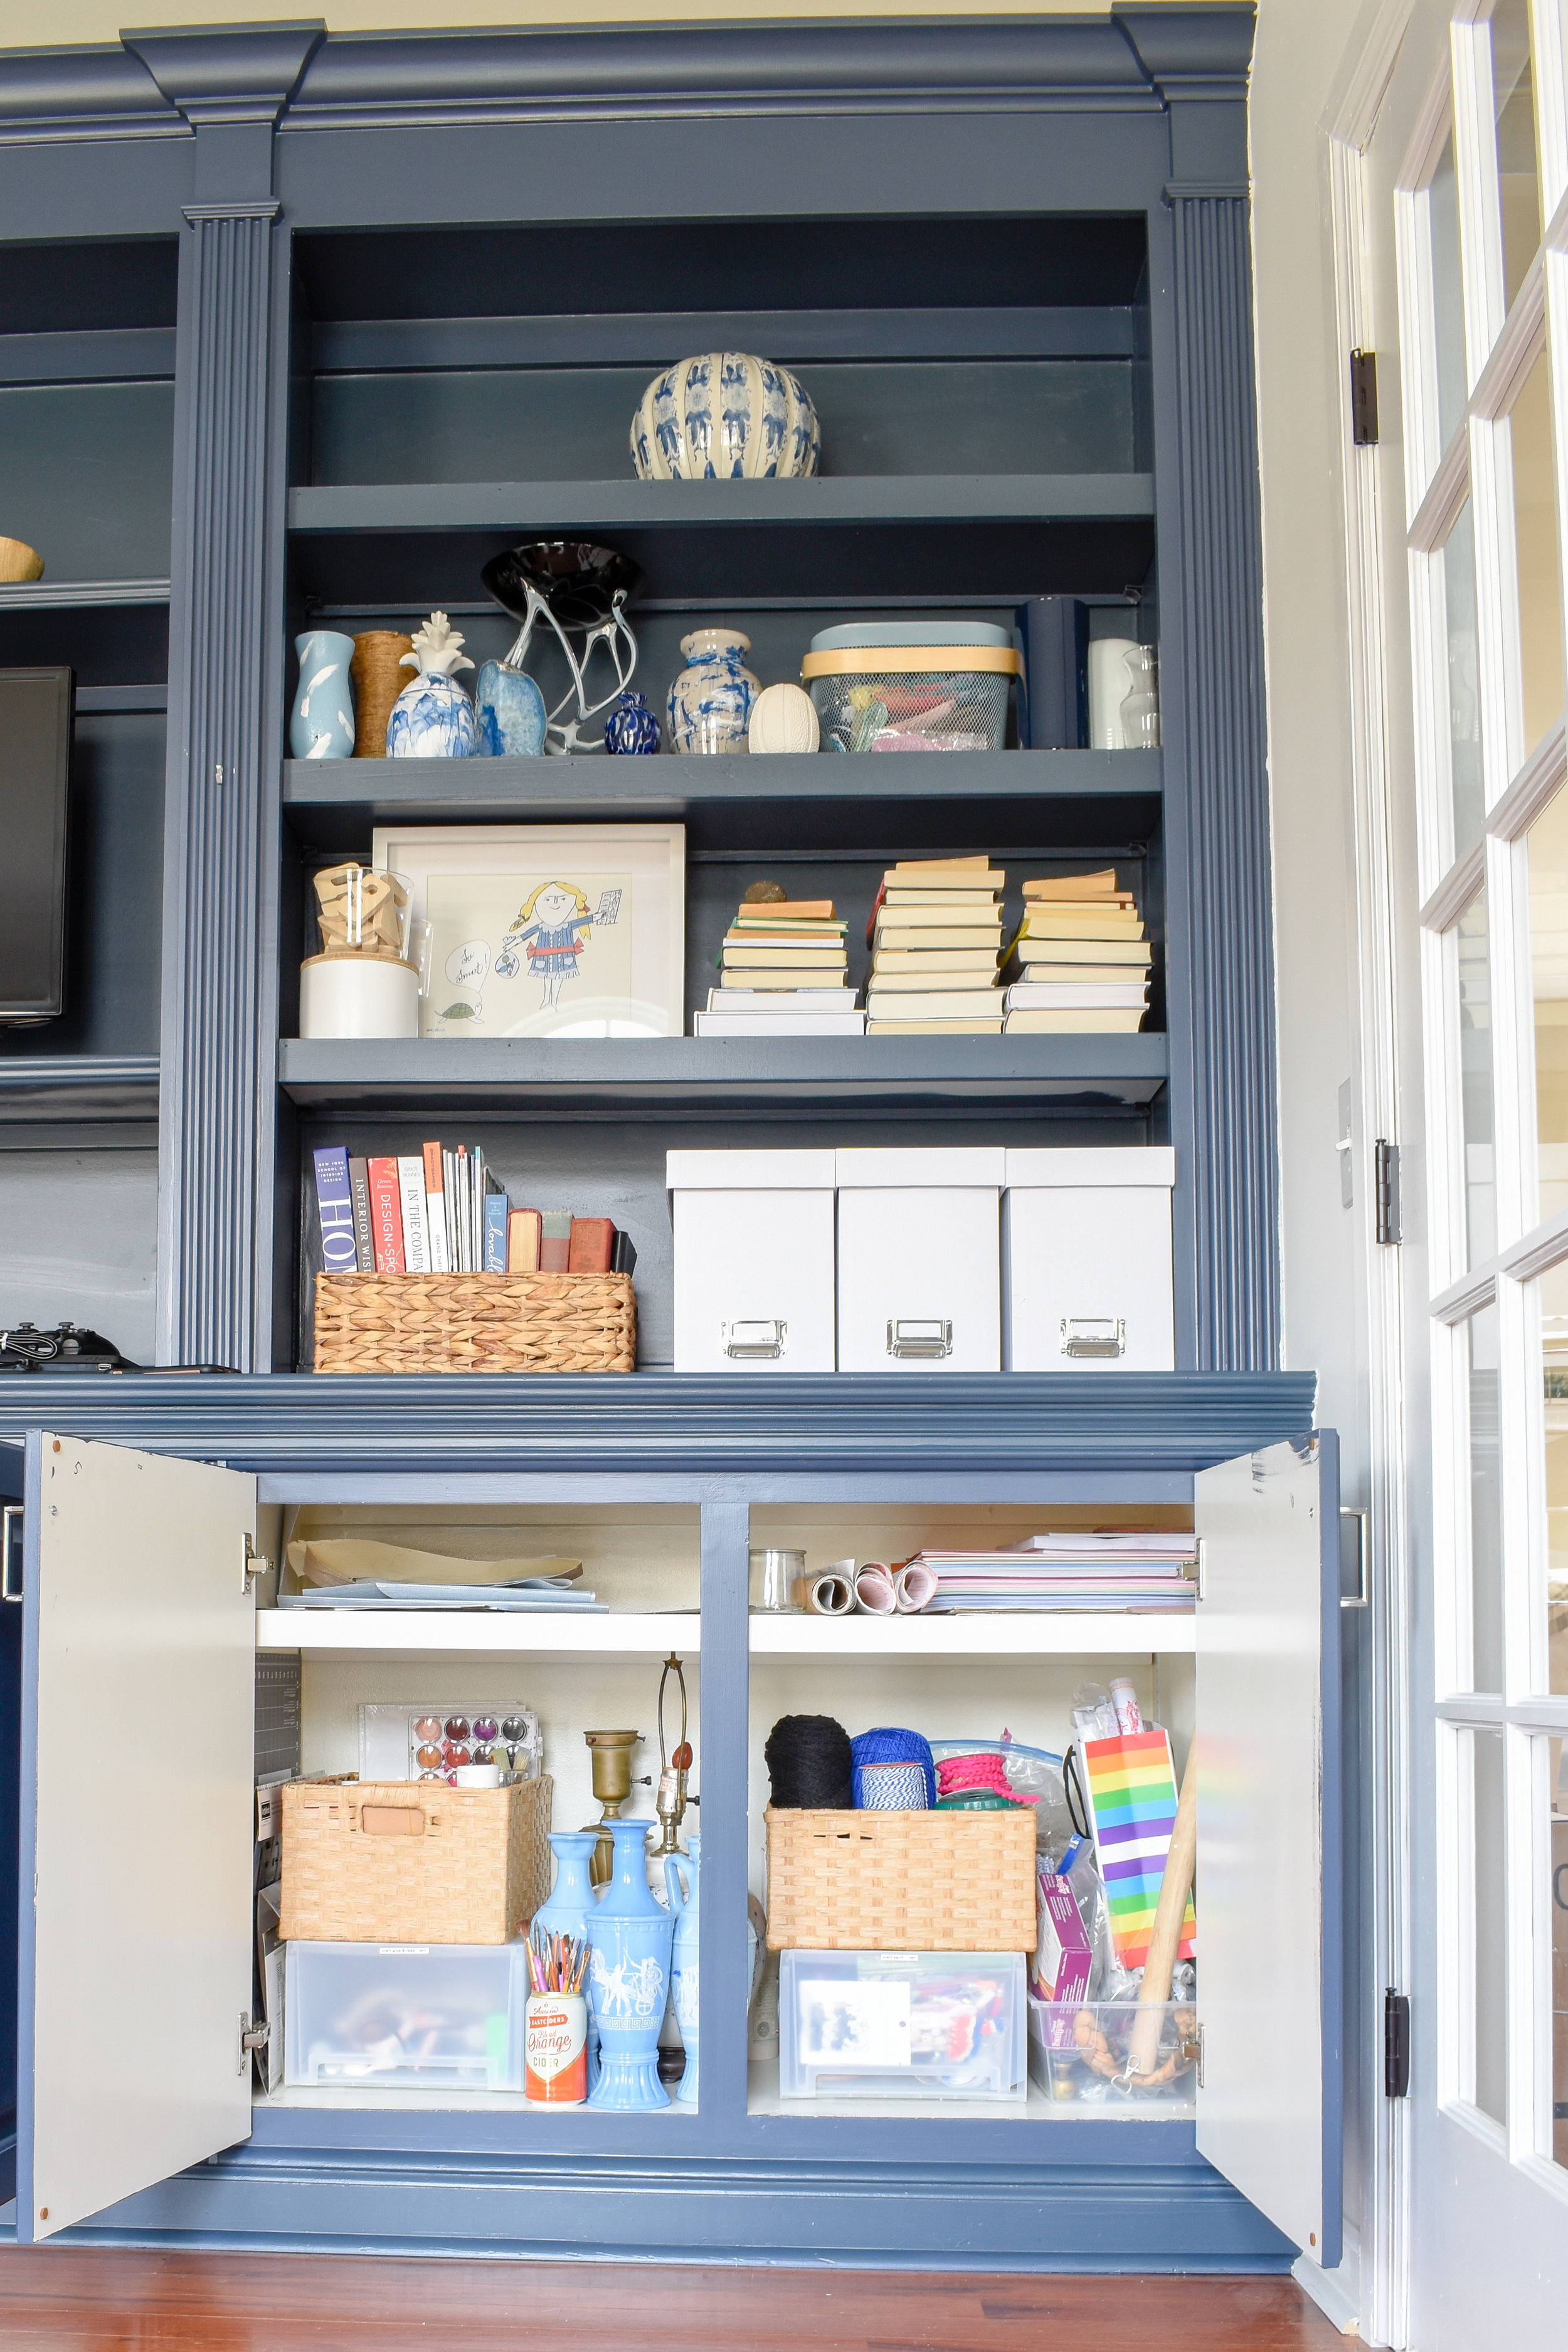 Home Office Storage Ideas - I display my shop's inventory in open shelving that's easy to access and charming.